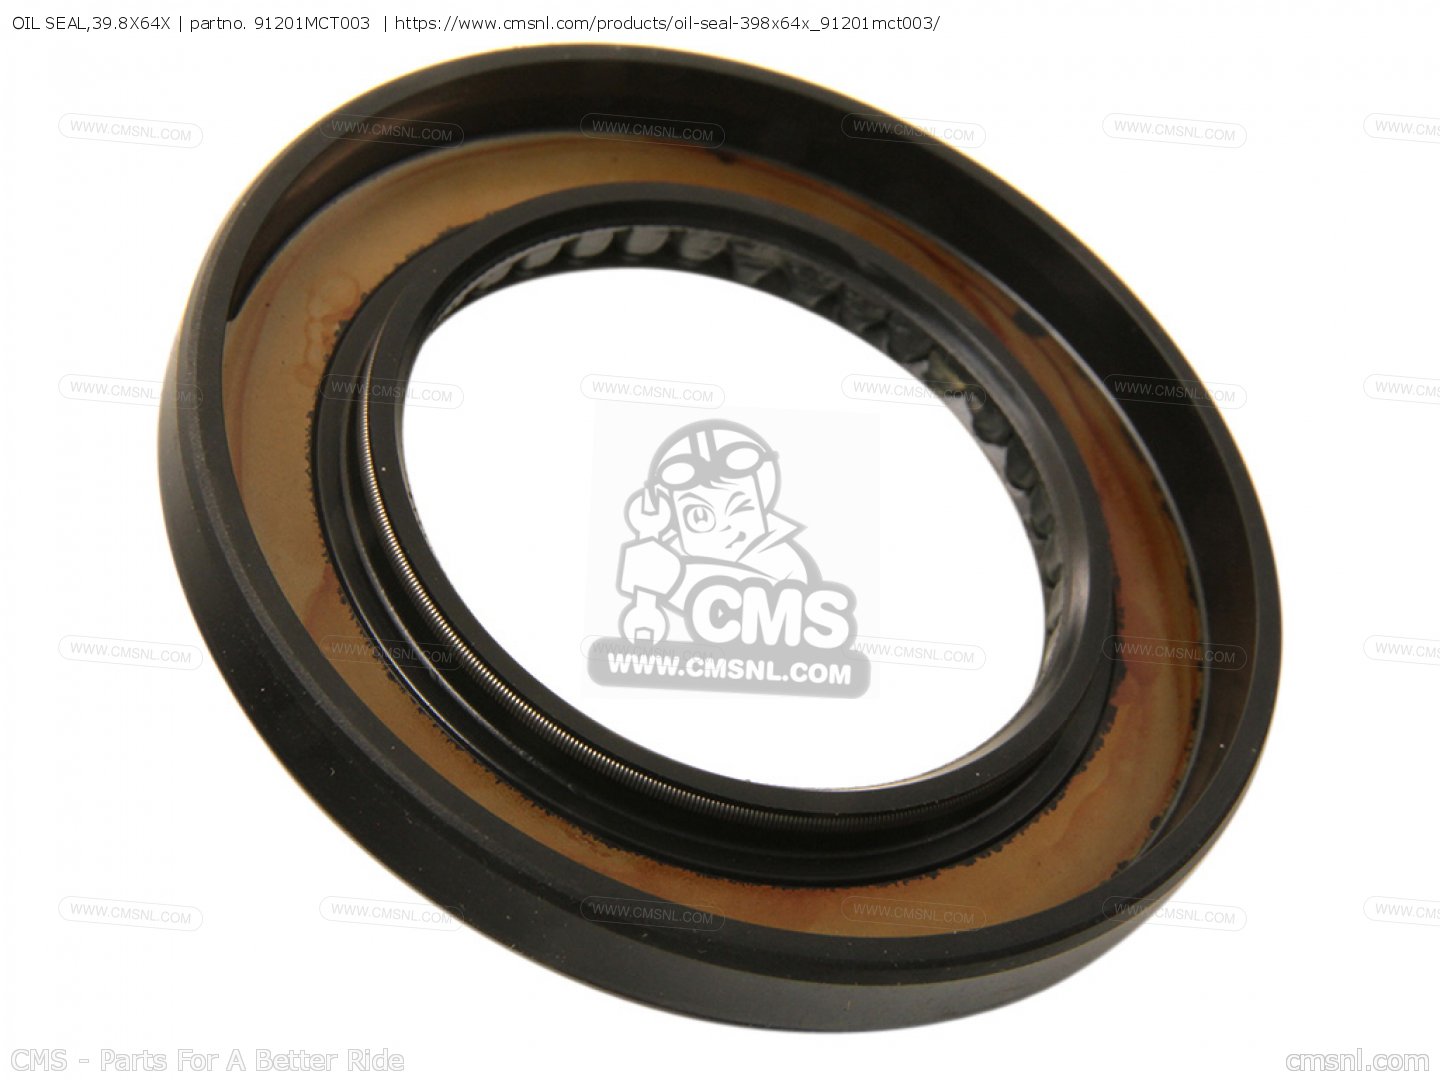 OIL SEAL,39.8X64X for FJS400A SILVER WING 2009 (9) SINGAPORE / ABS 